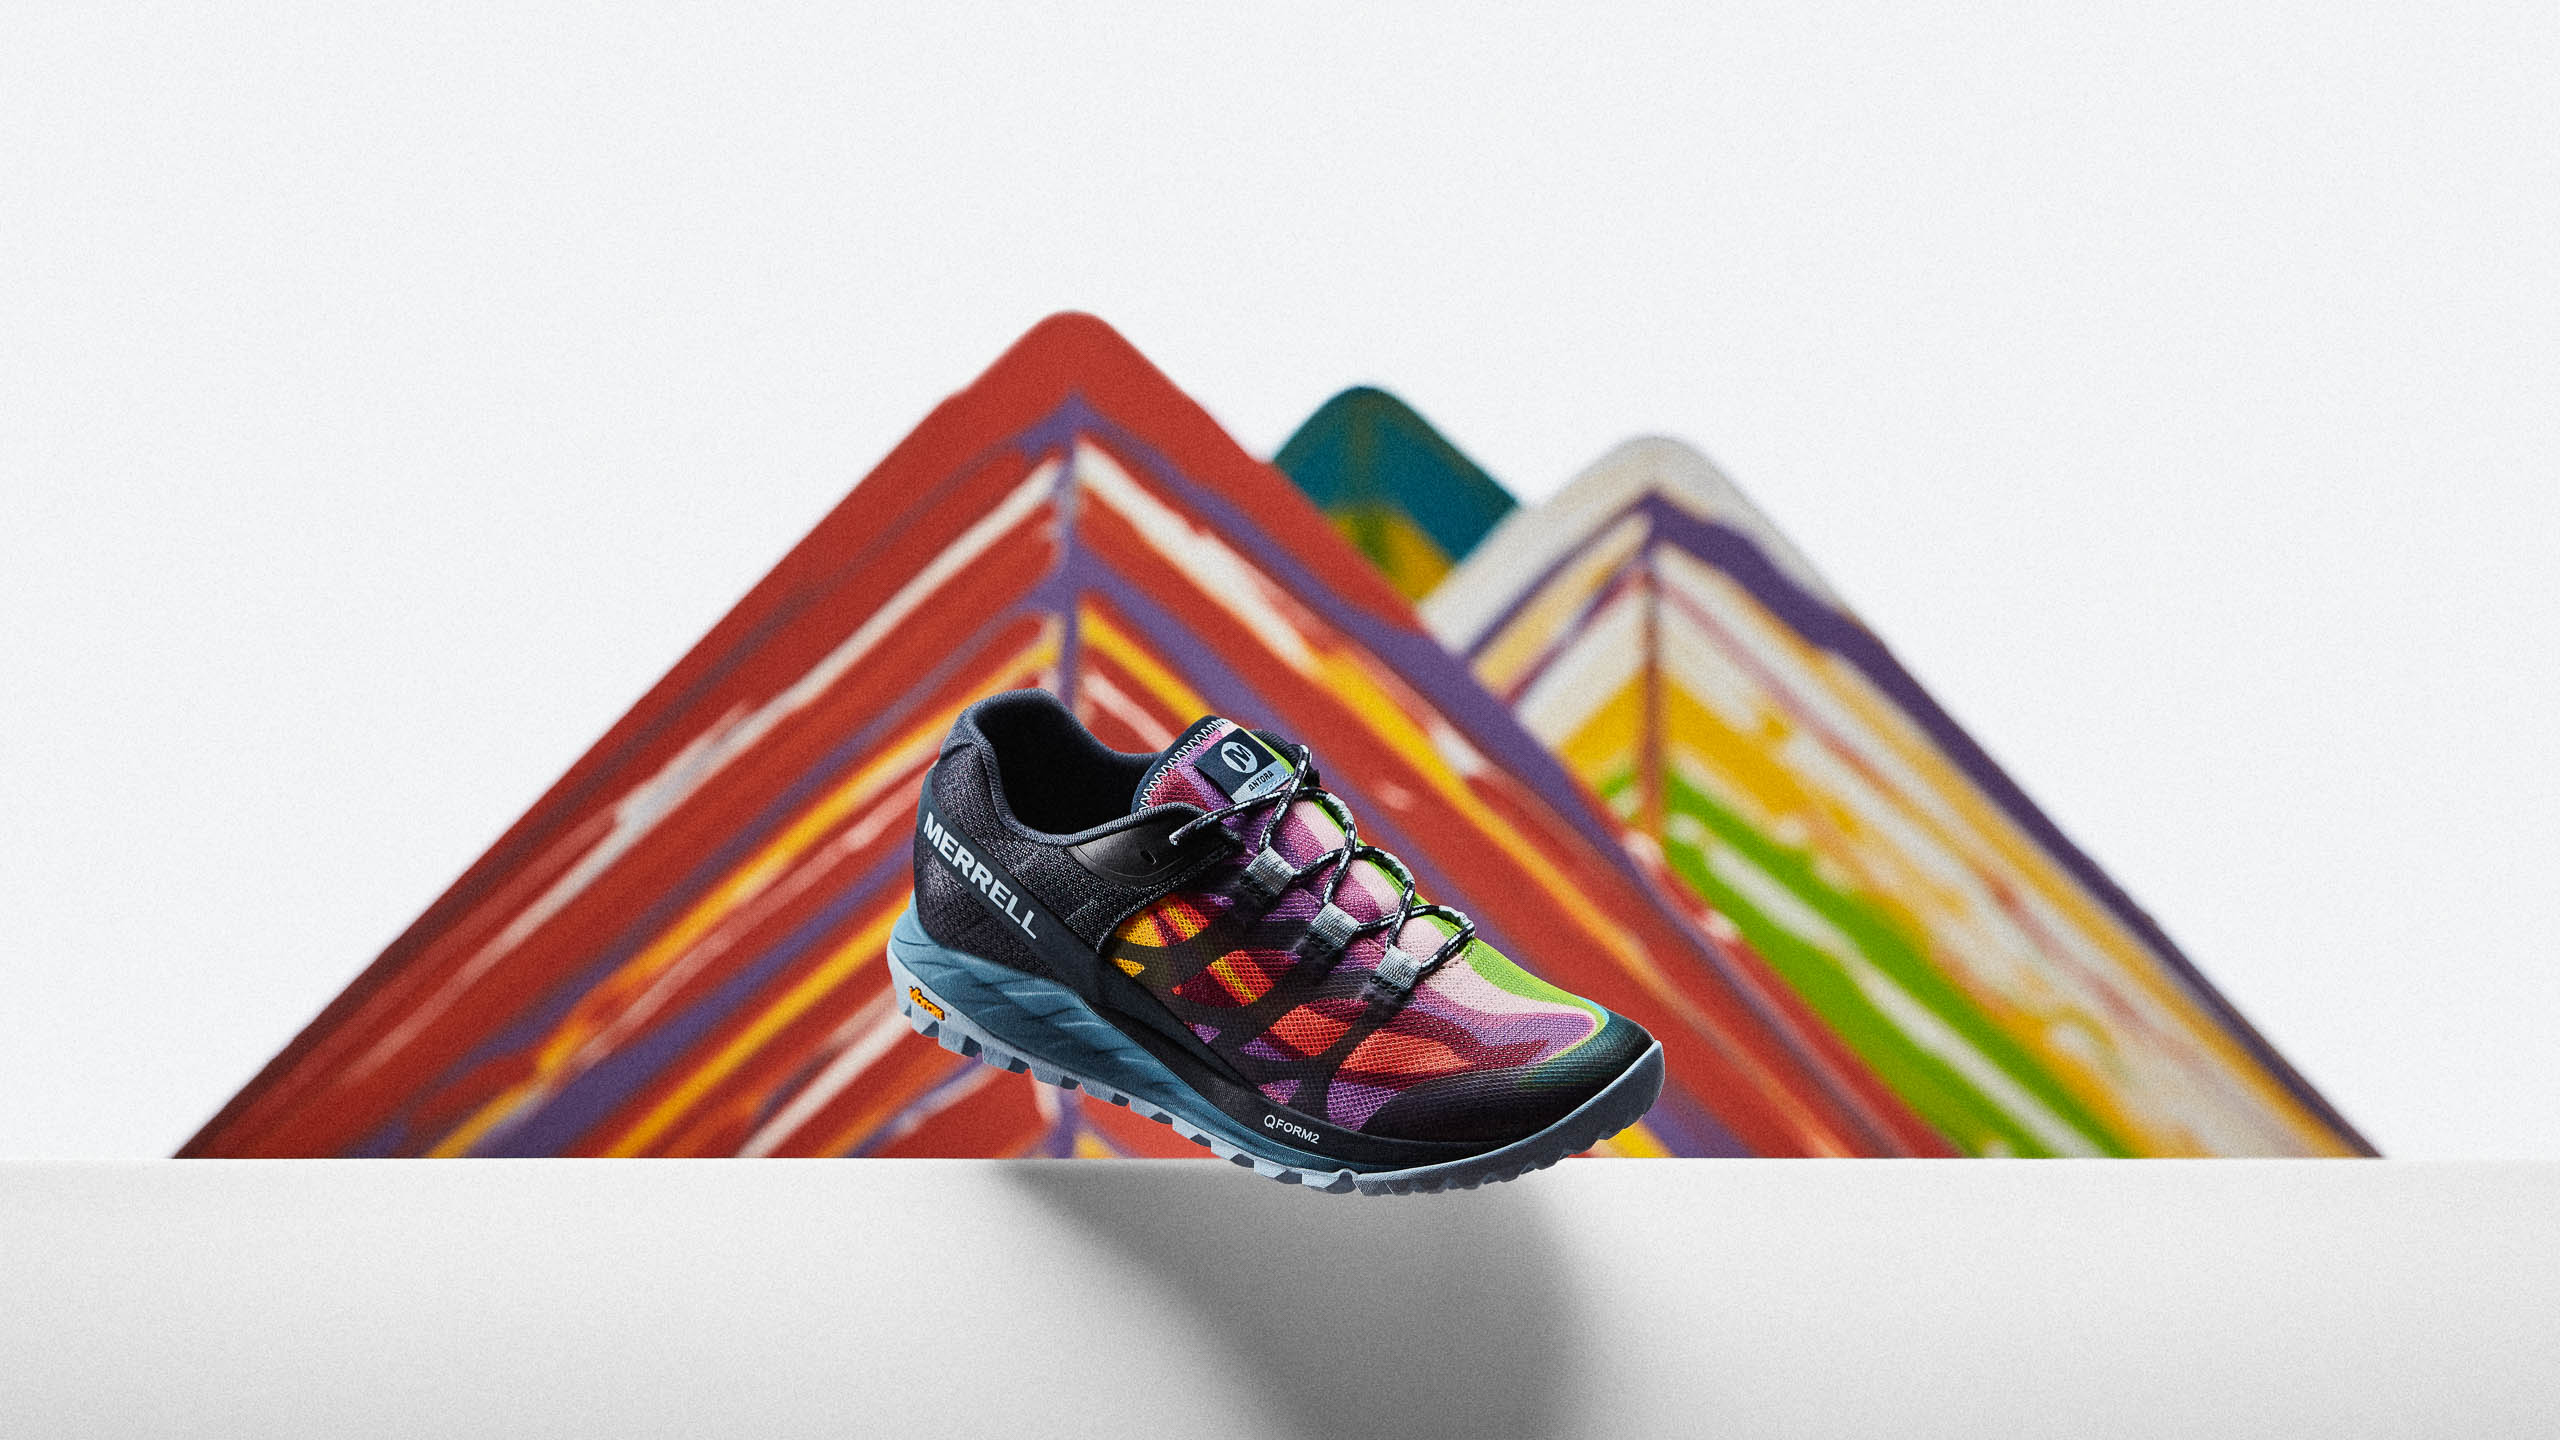 Merrell Antora inspired by the Painted Mountains